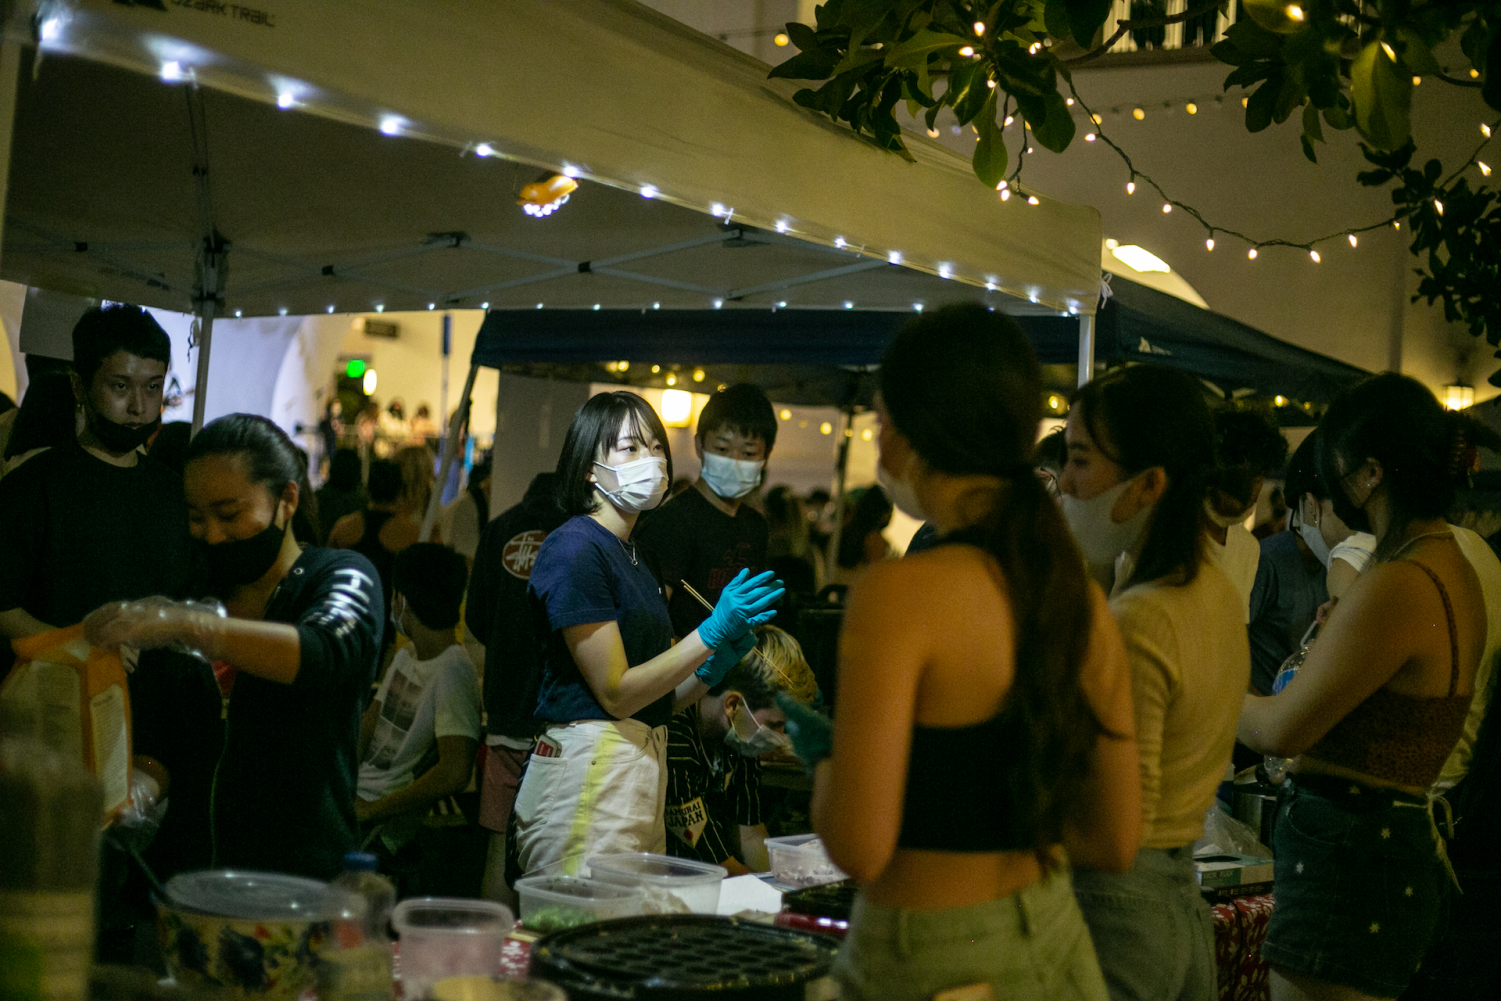 The APIDA Night Market presented multiple stalls with student organizations selling food and drinks on Thursday, Oct. 28.